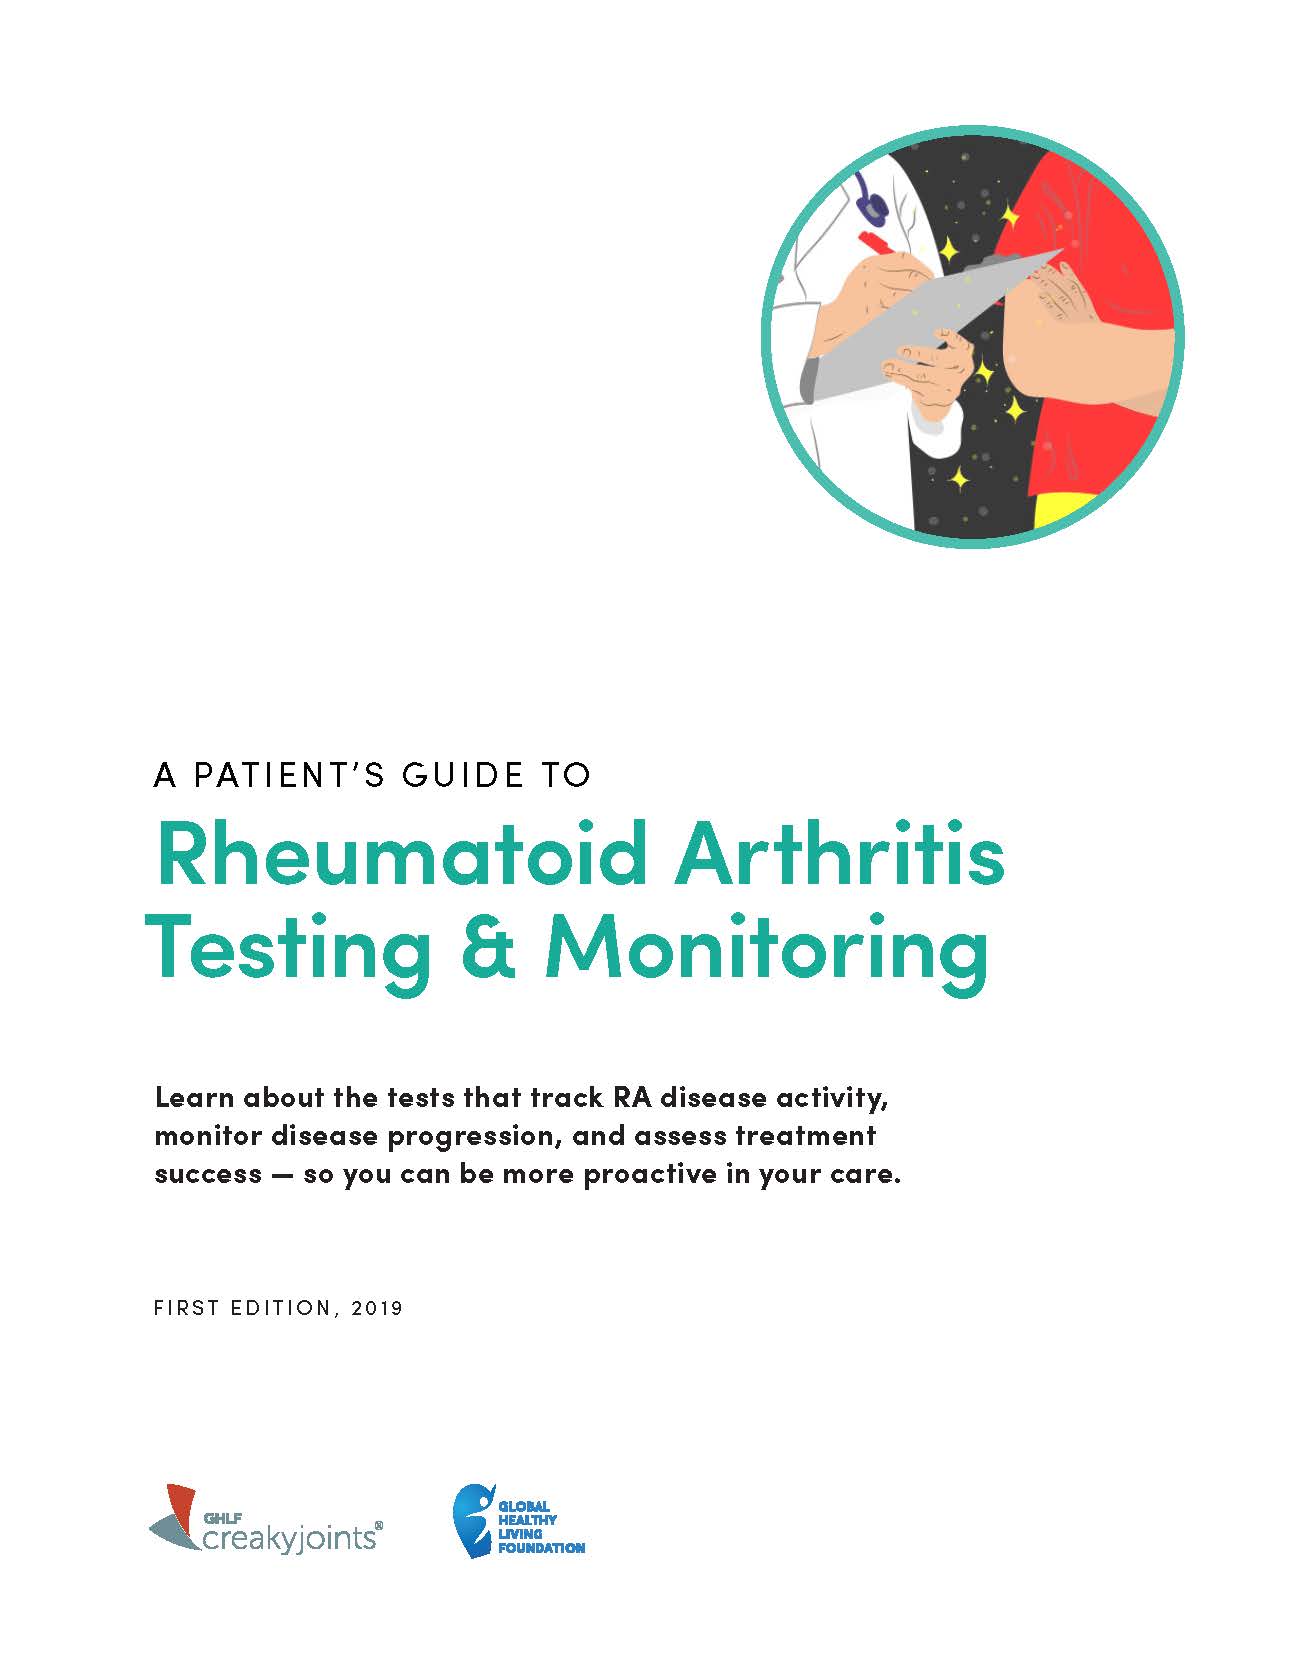 Image reads: A Patient’s Guide to Rheumatoid Arthritis Testing and Monitoring Learn about the tests that track RA disease activity, monitor disease progression, and assess treatment success- so you can be more proactive in your care.